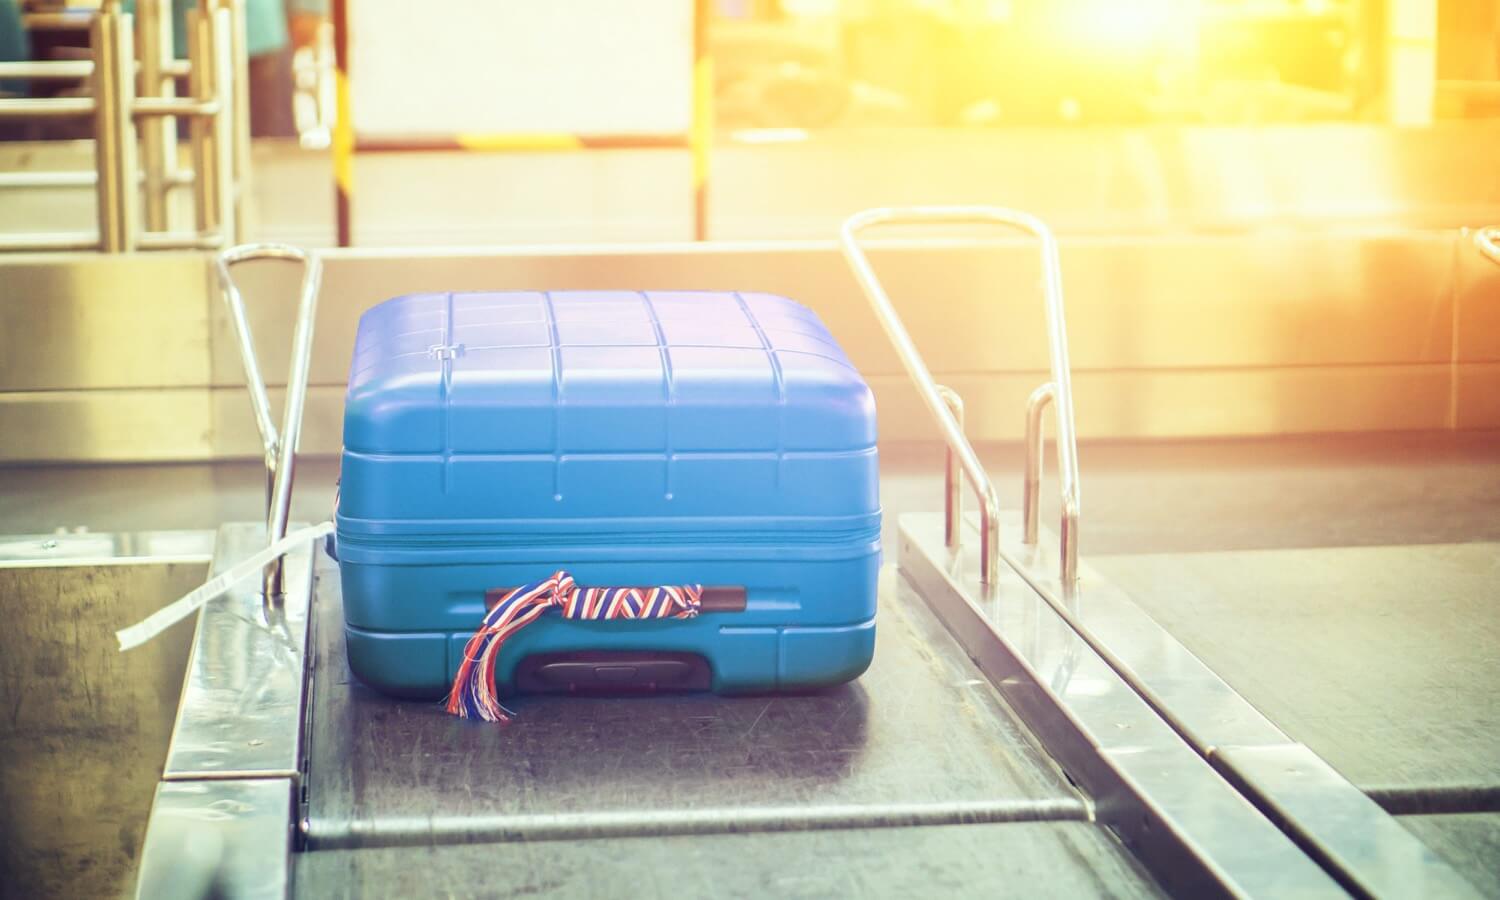 The new app handles Luggage better robotic suitcase